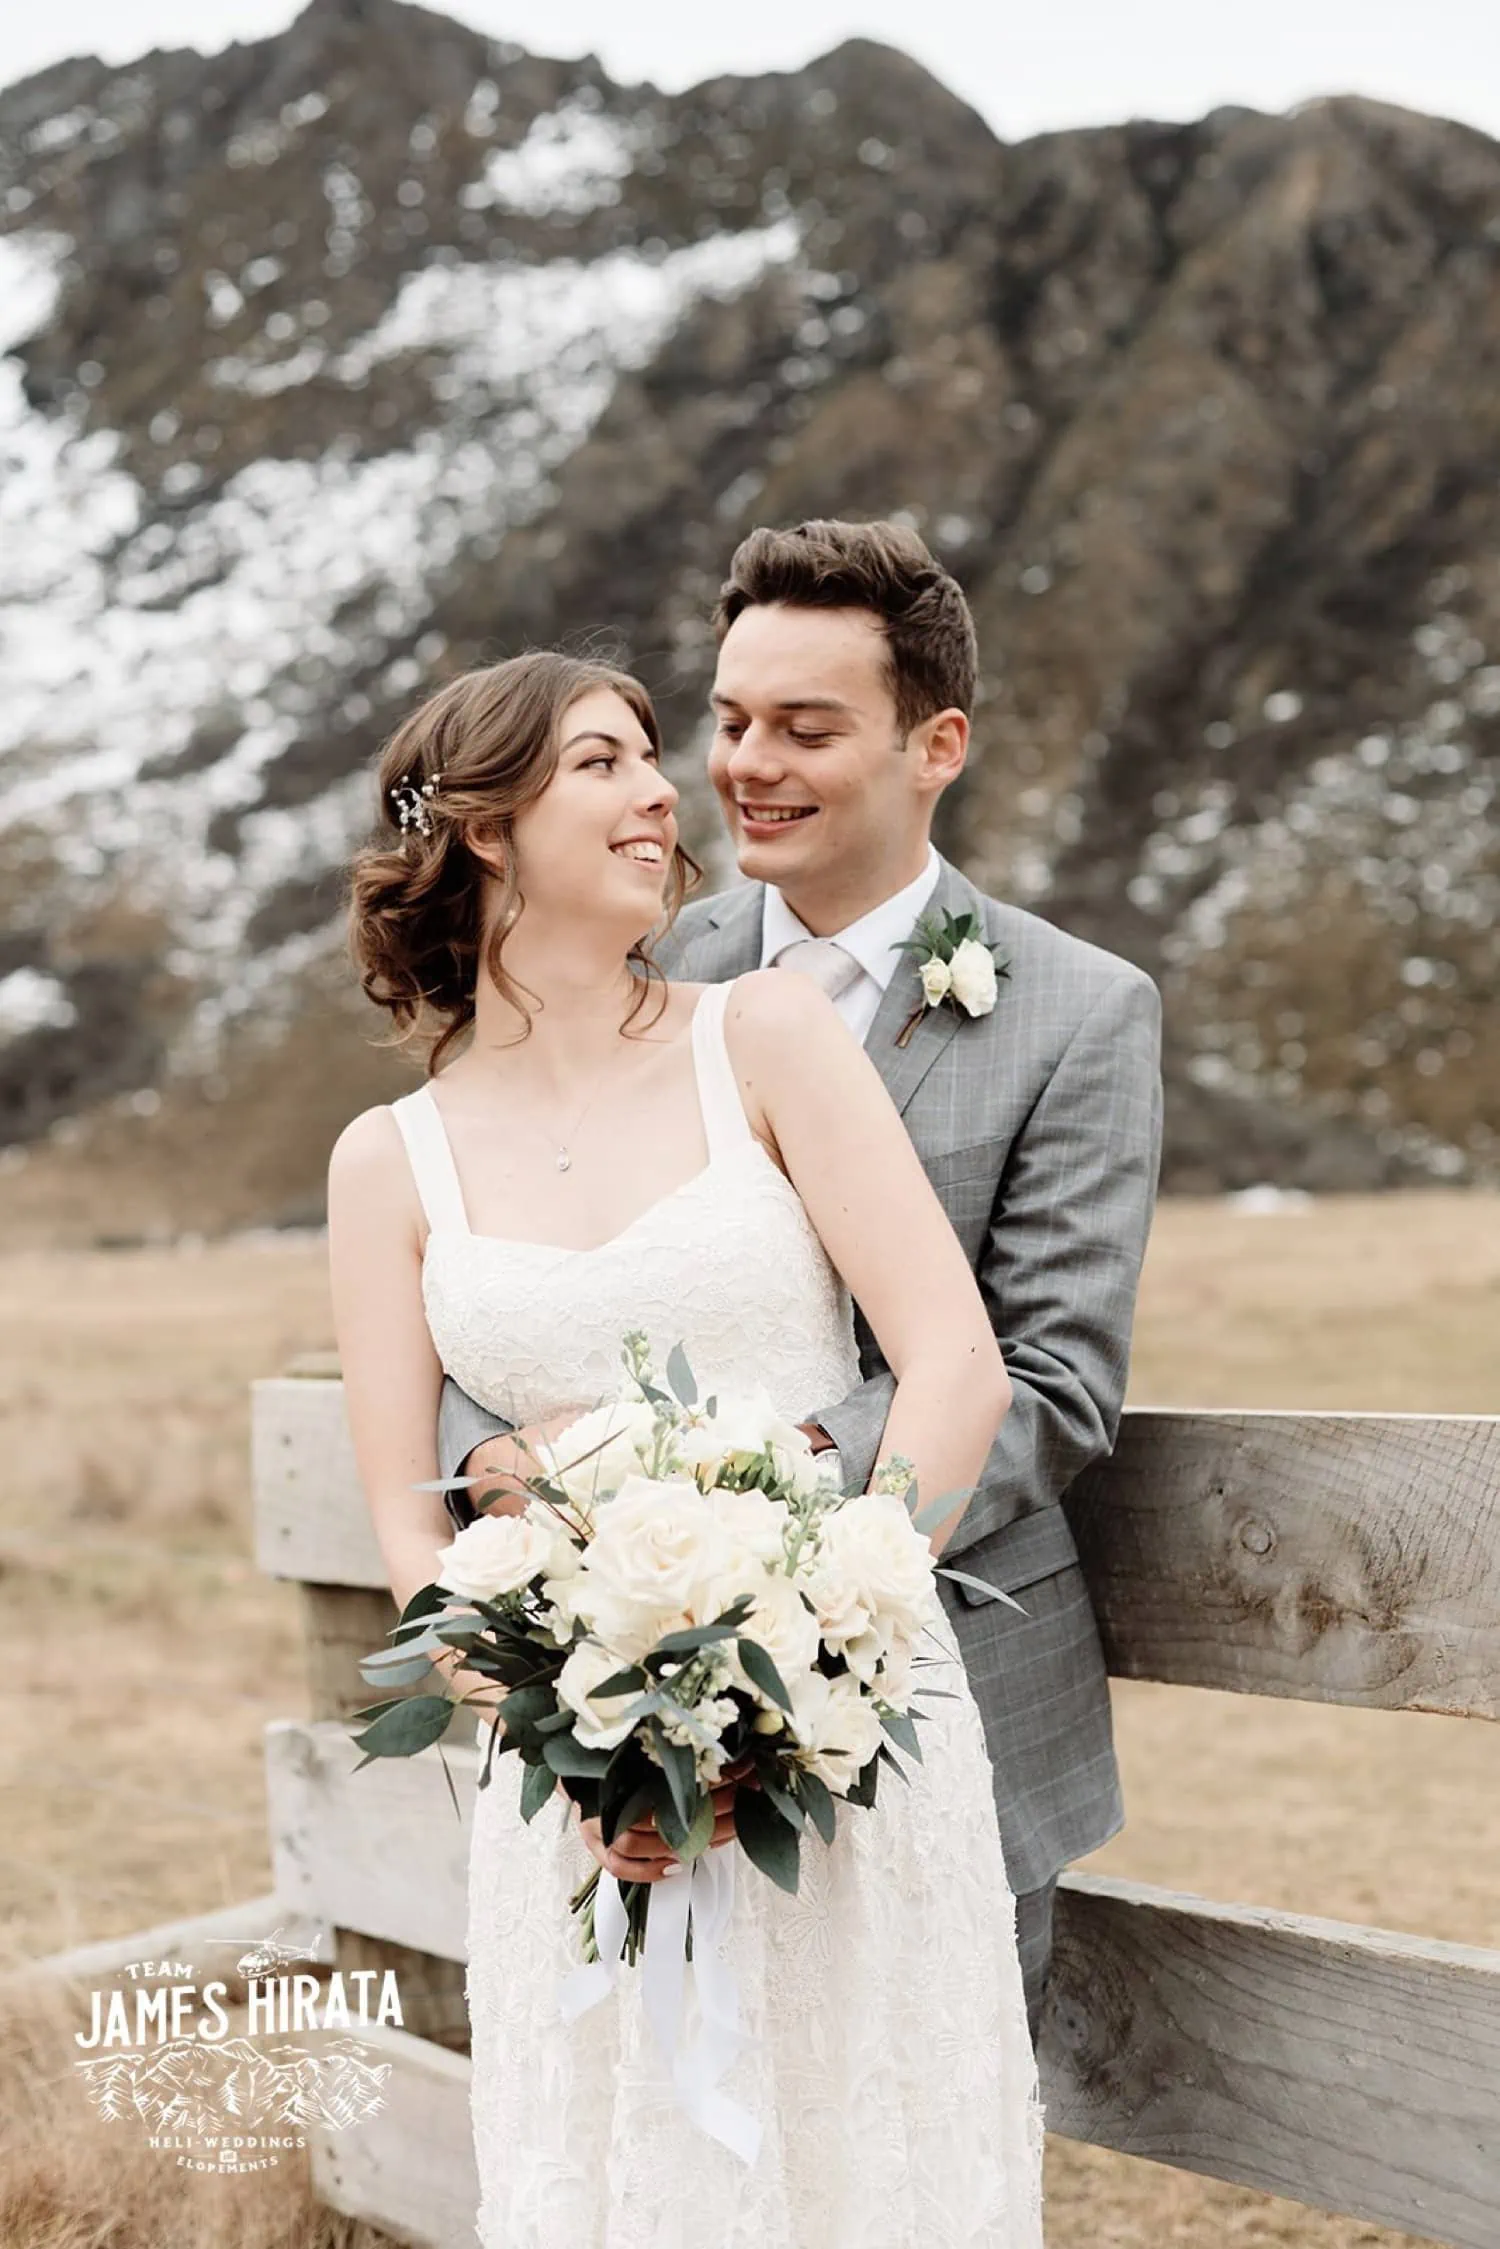 Regan & Jake's Queenstown elopement wedding with mountains as the backdrop.